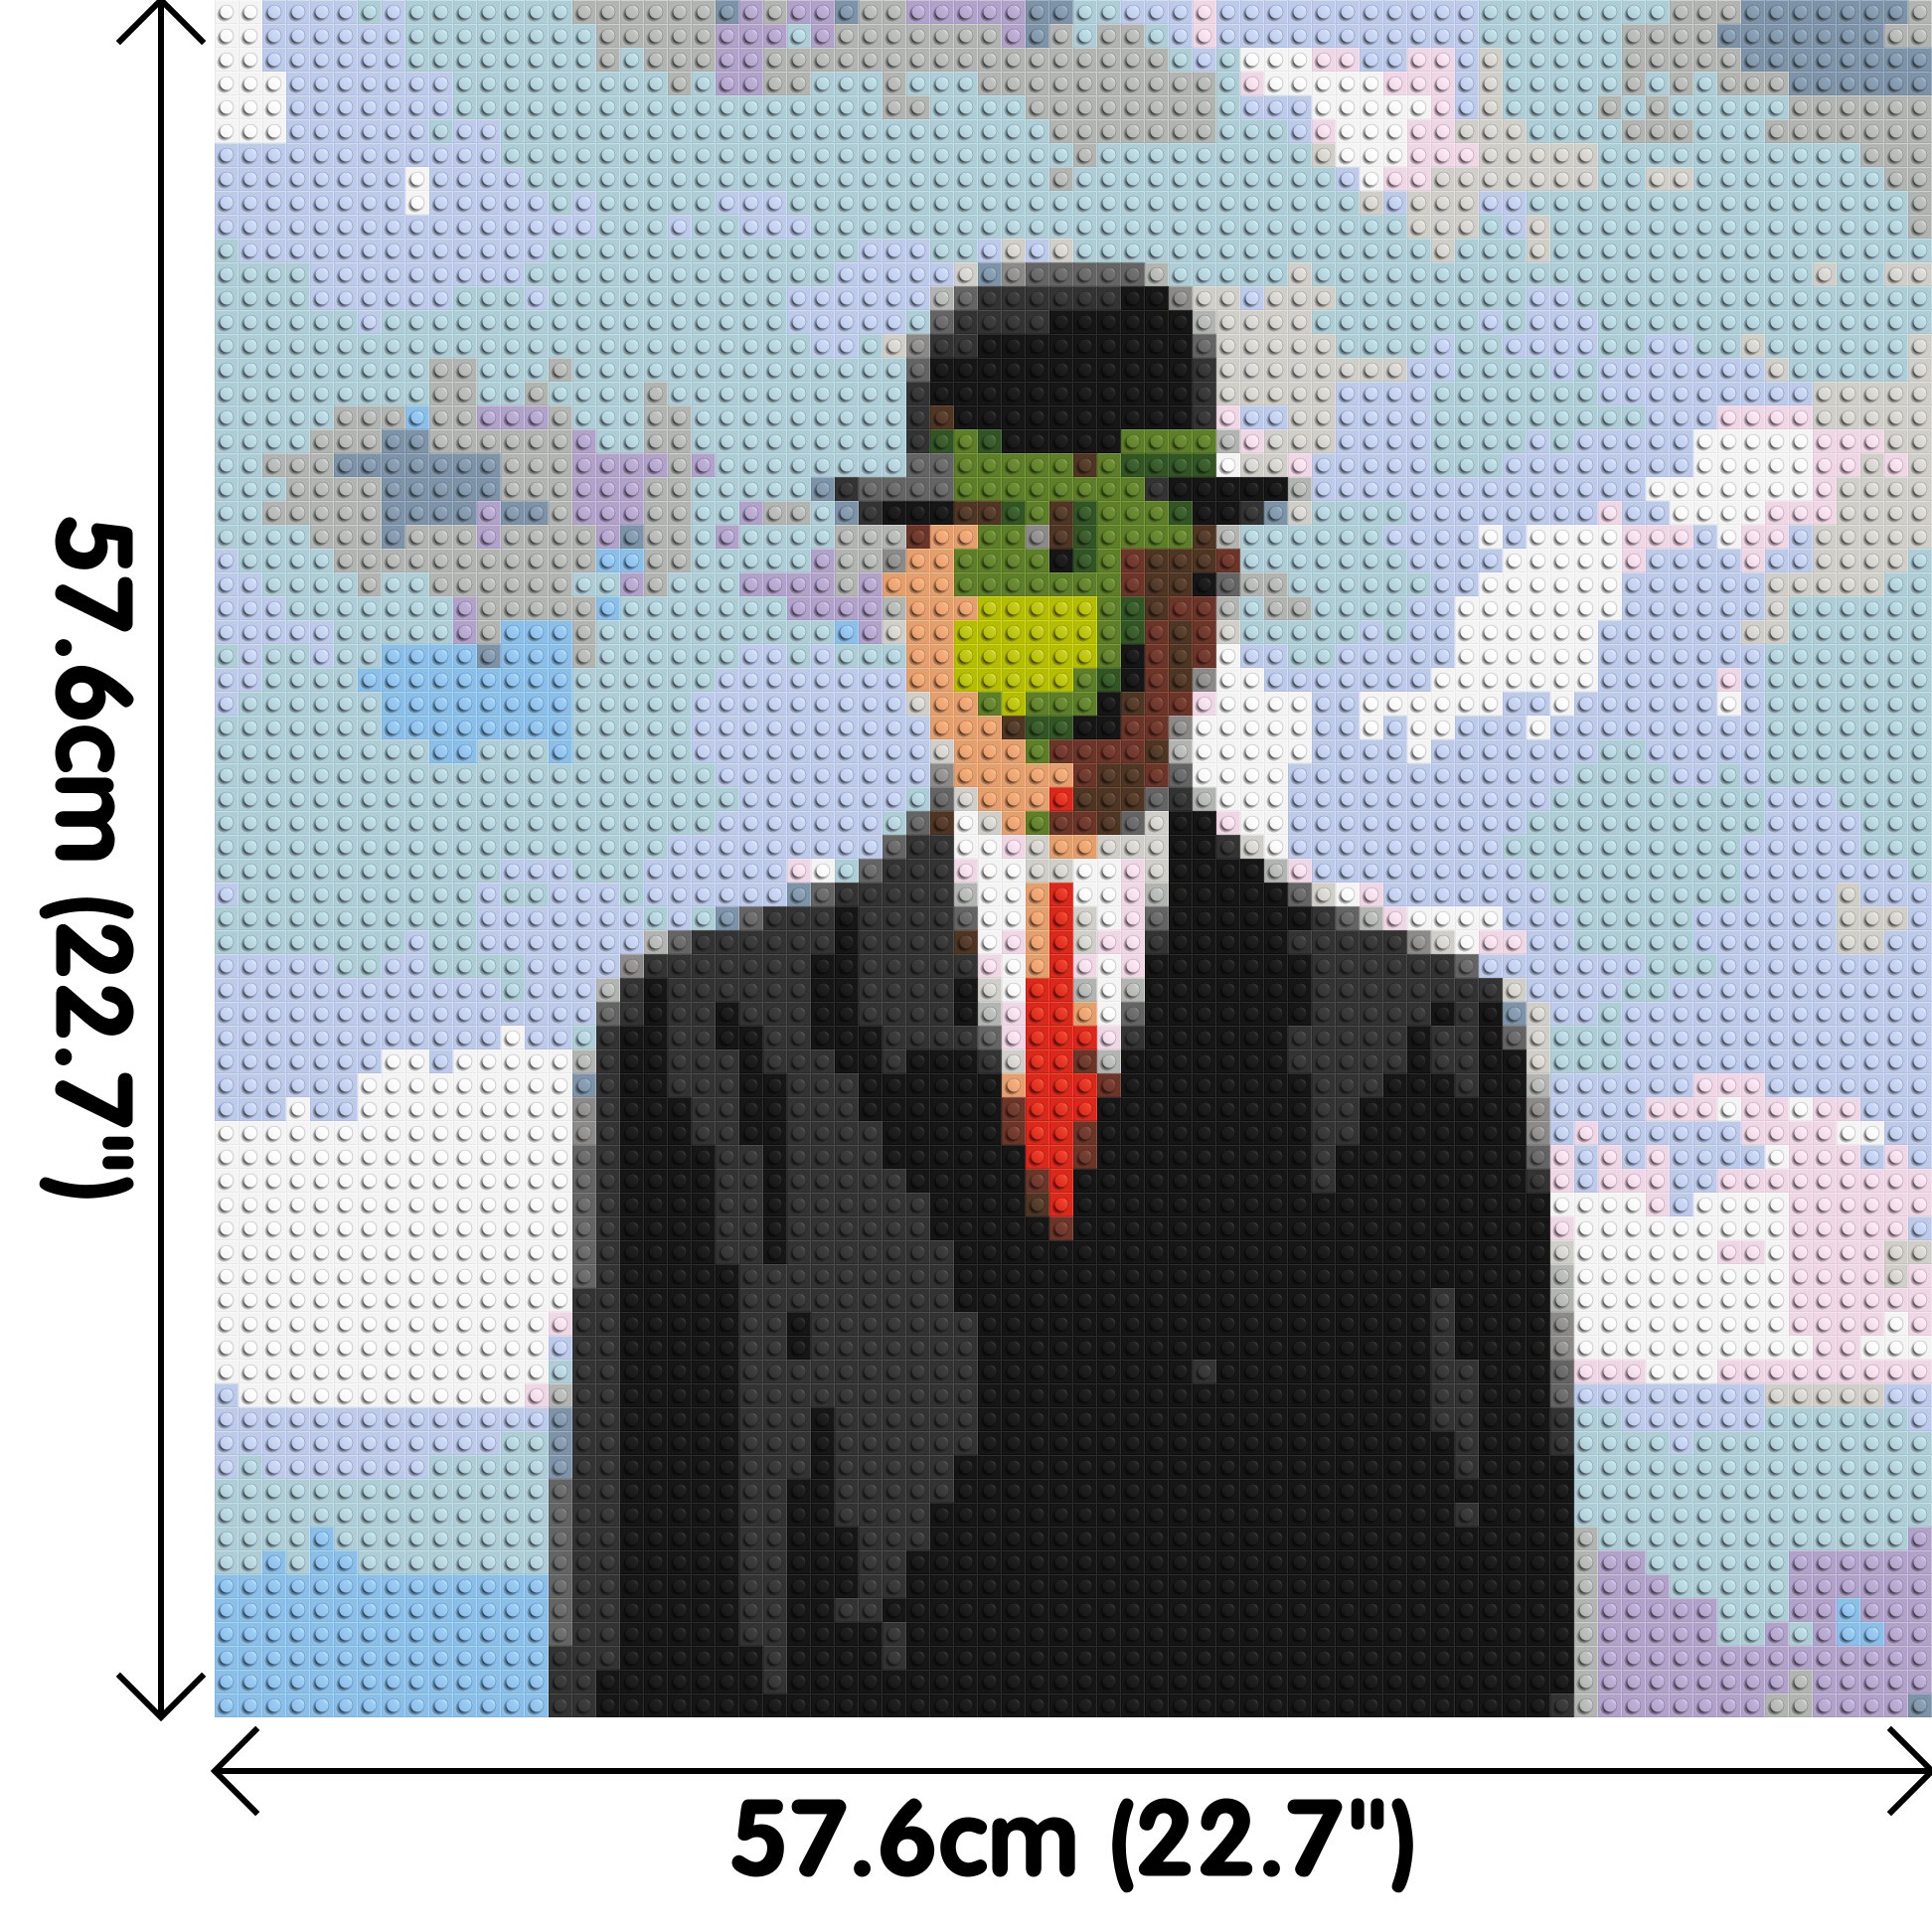 The Son of Man by René Magritte - Brick Art Mosaic Kit 3x3 dimensions